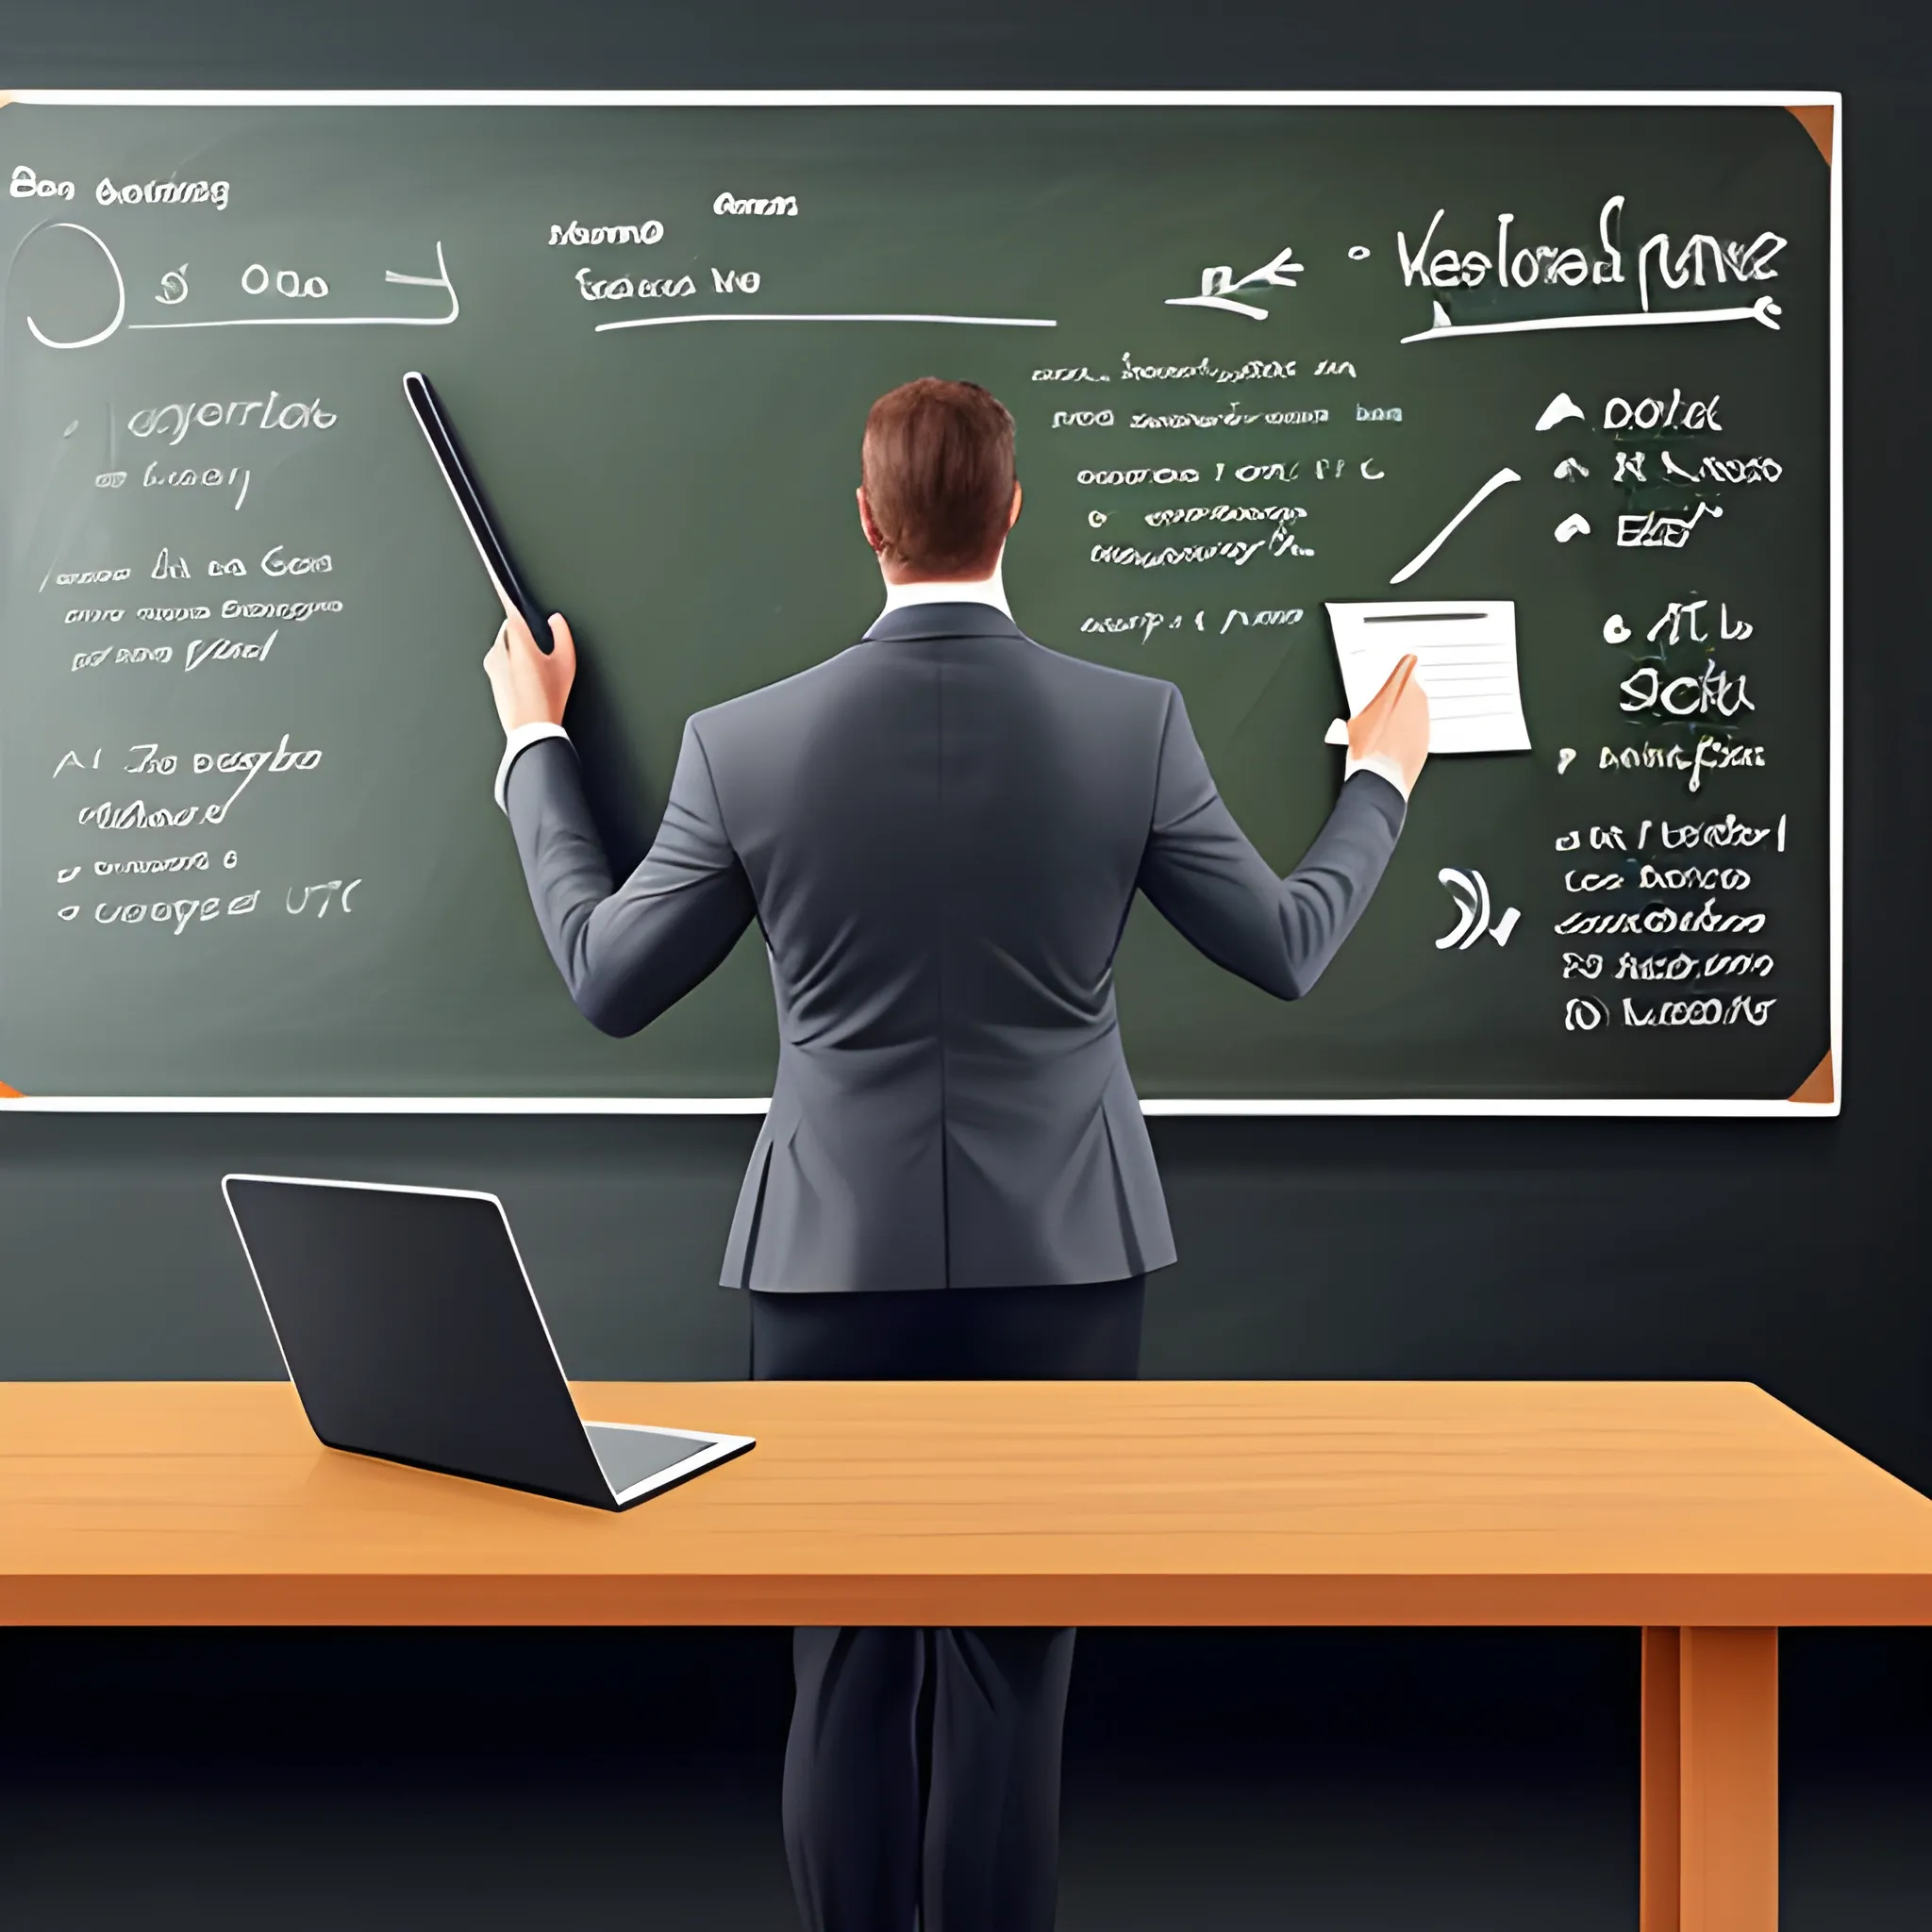 Design an image of a person standing in front of a chalkboard, teaching a class of students who are taking notes on their laptops or tablets. The chalkboard should display various concepts and strategies related to making money online, such as SEO, email marketing, and social media promotion, Cartoon